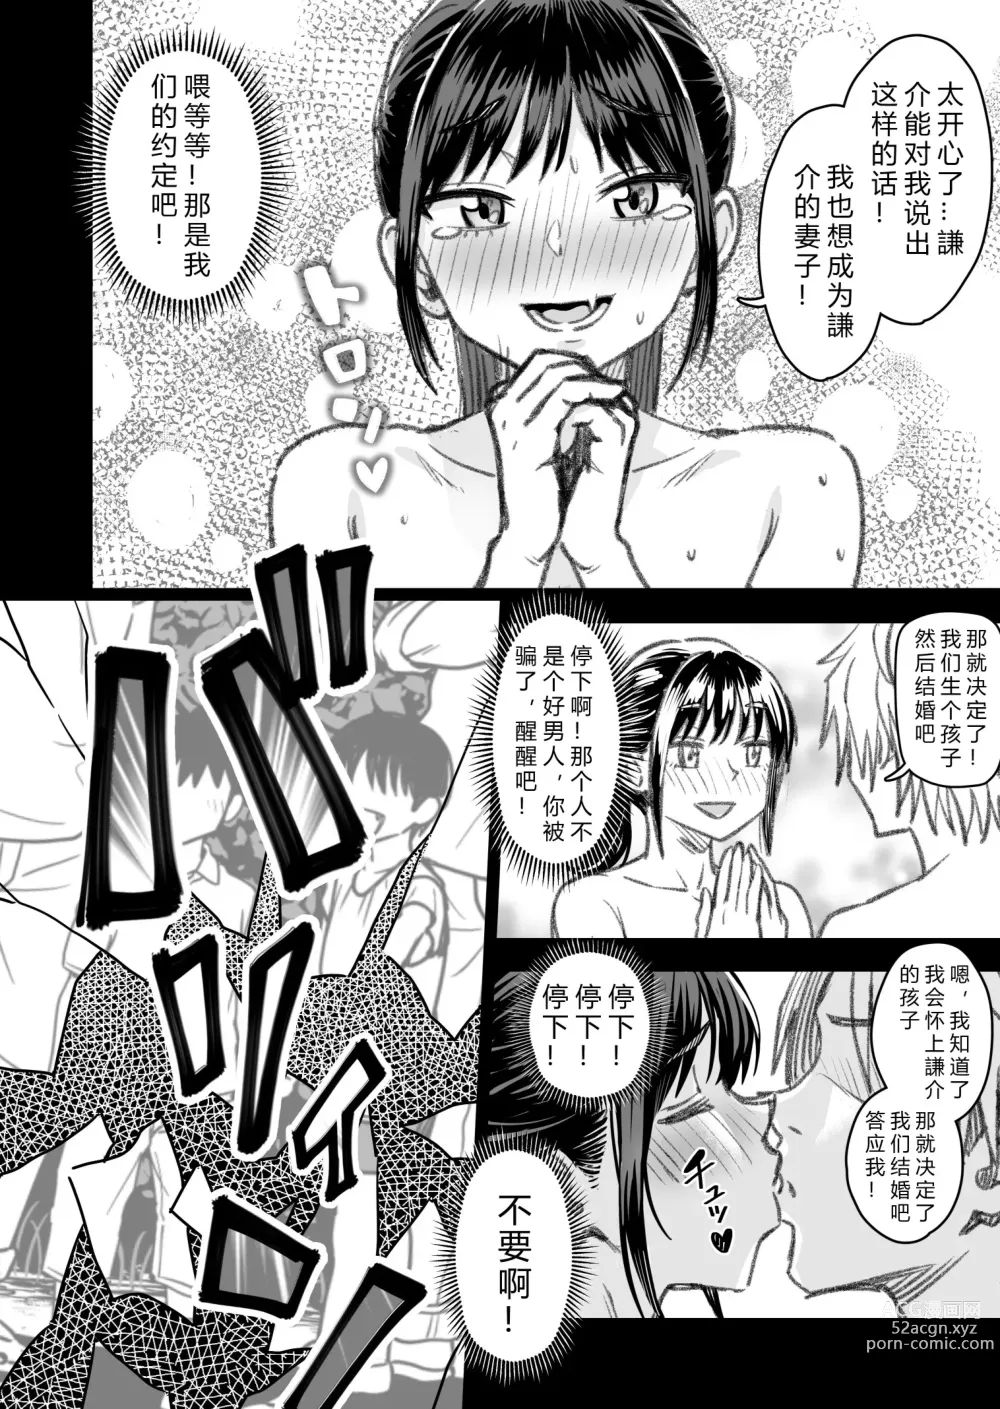 Page 145 of doujinshi How will the Protagonist's Brain be destroyed?